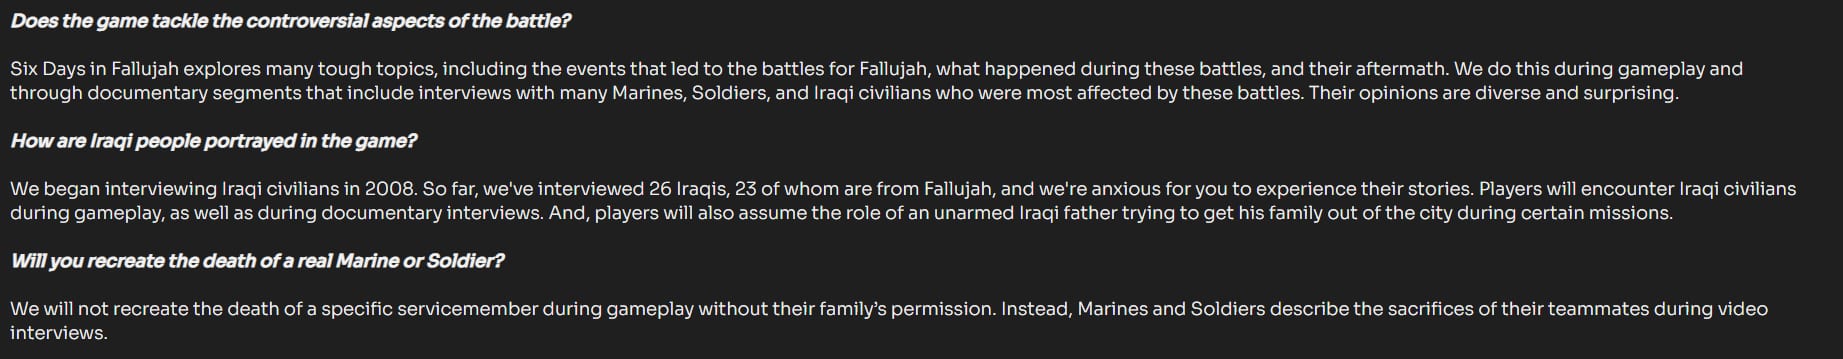 Six Days in Fallujah grow up past bad marketing Victura Highwire Games Peter Tamte Jaime Griesemer versus a petition to cancel for fear of racism and lies